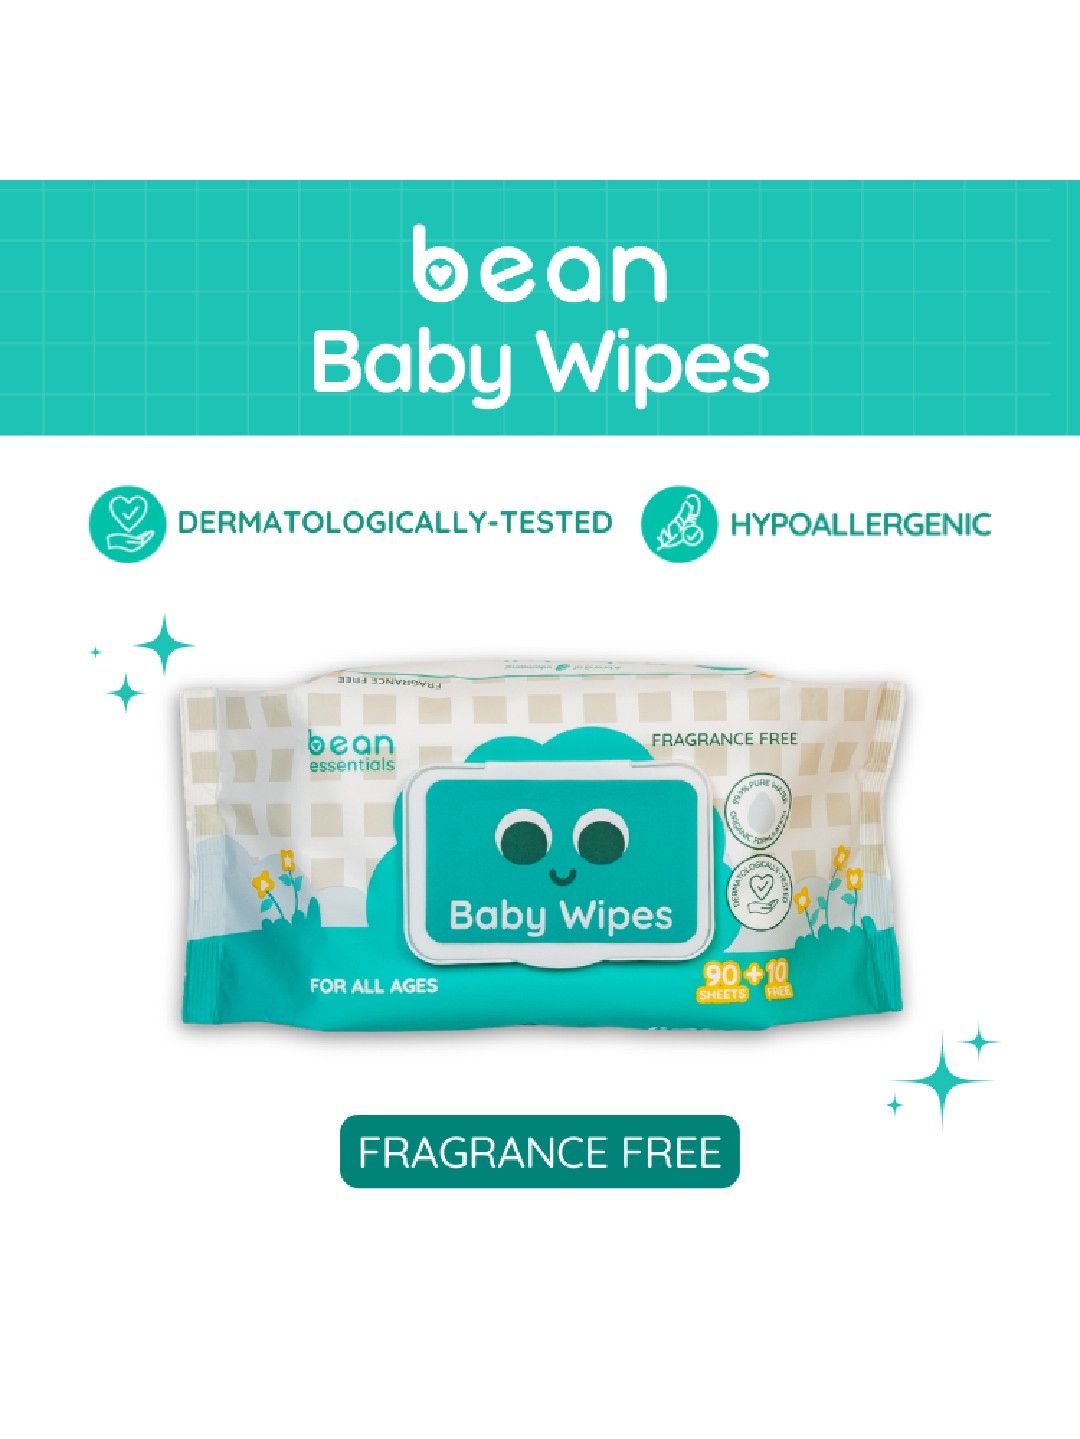 bean essentials Baby Wipes Fragrance Free 100 sheets